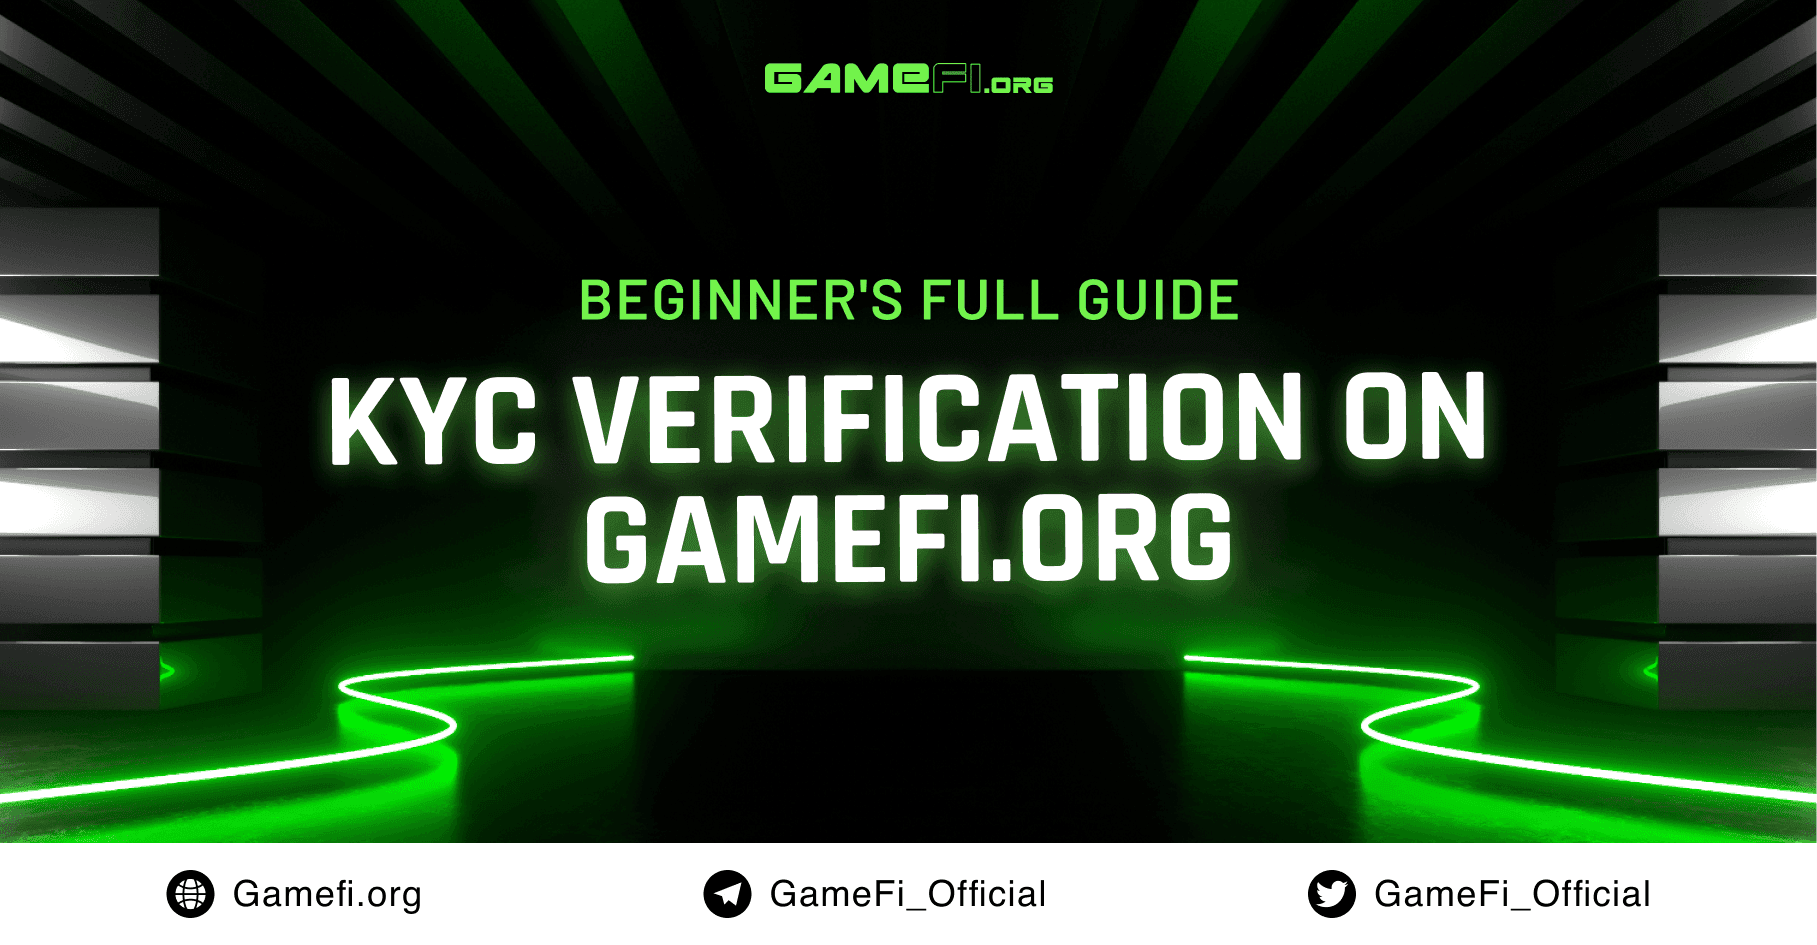 HOW TO GET YOUR KYC PROCESS APPROVED ON GAMEFI.ORG?